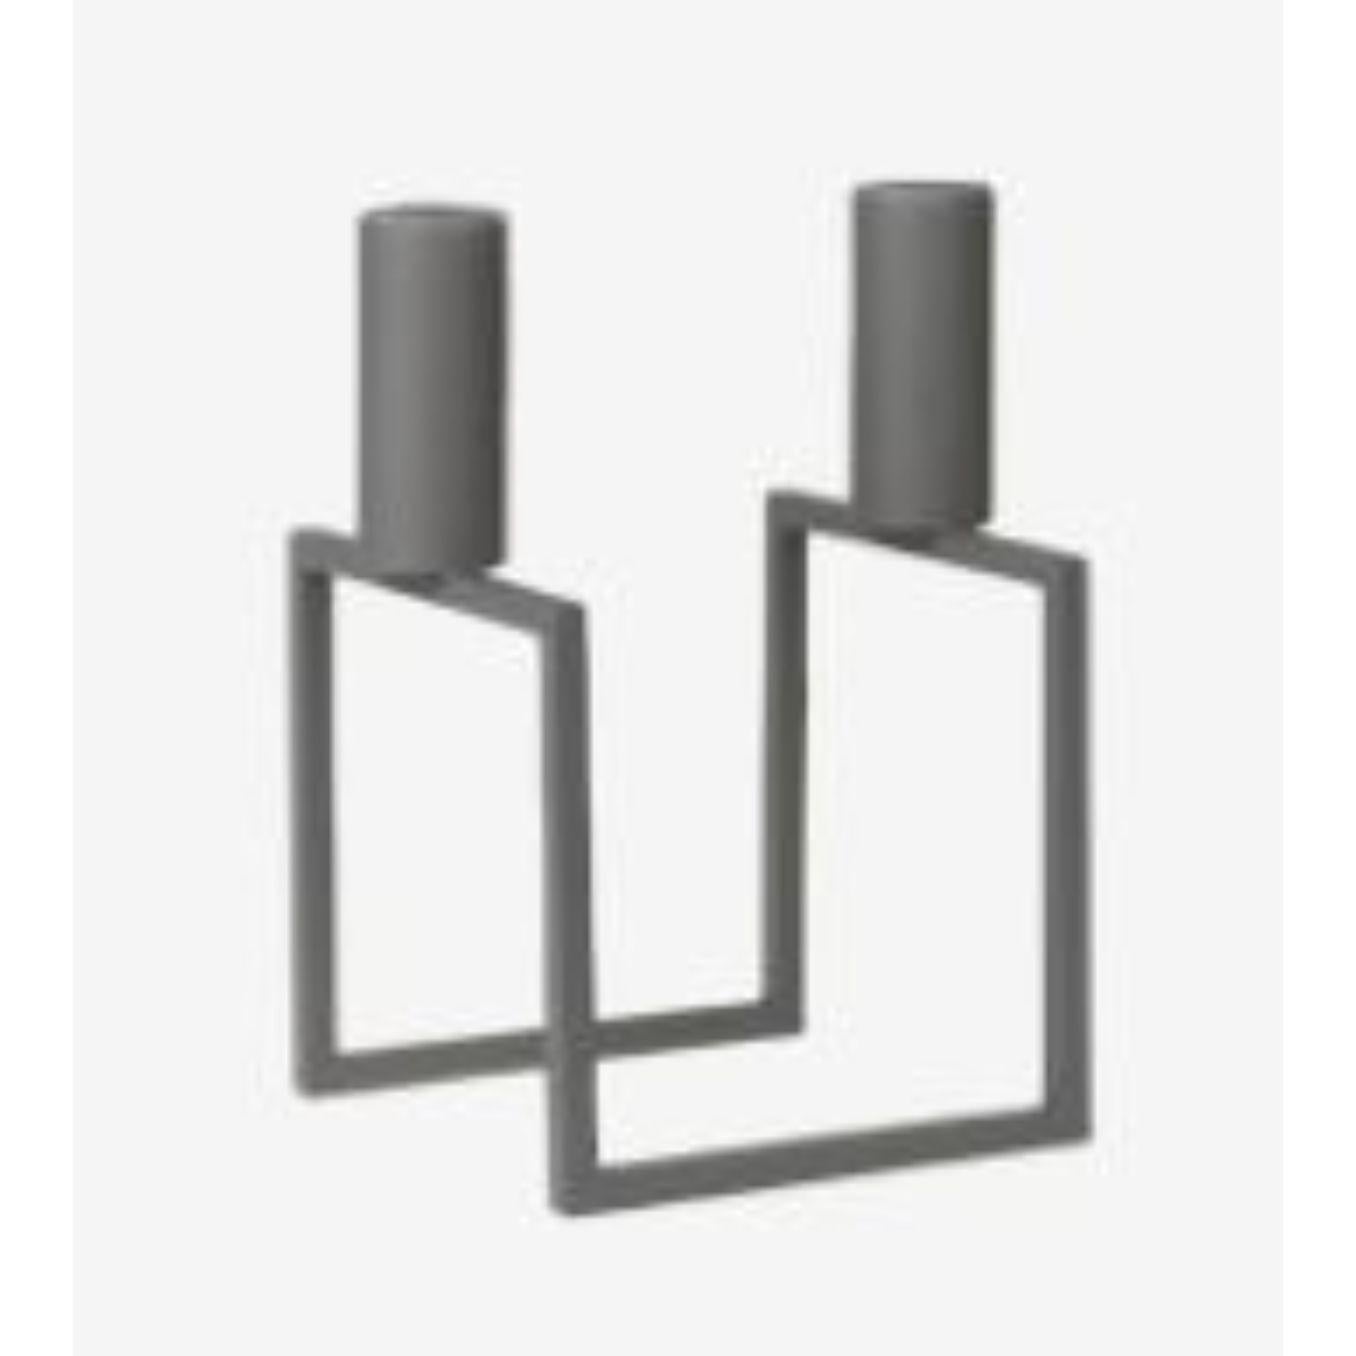 Grey Line candle holder by Lassen
Dimensions: D 10 x W 10 x H 16 cm 
Materials: Metal 
Also available in different dimensions. 
Weight: 0.60 Kg

With a sharp sense of contemporary Functionalist style, Mogens Lassen designed the iconic Kubus